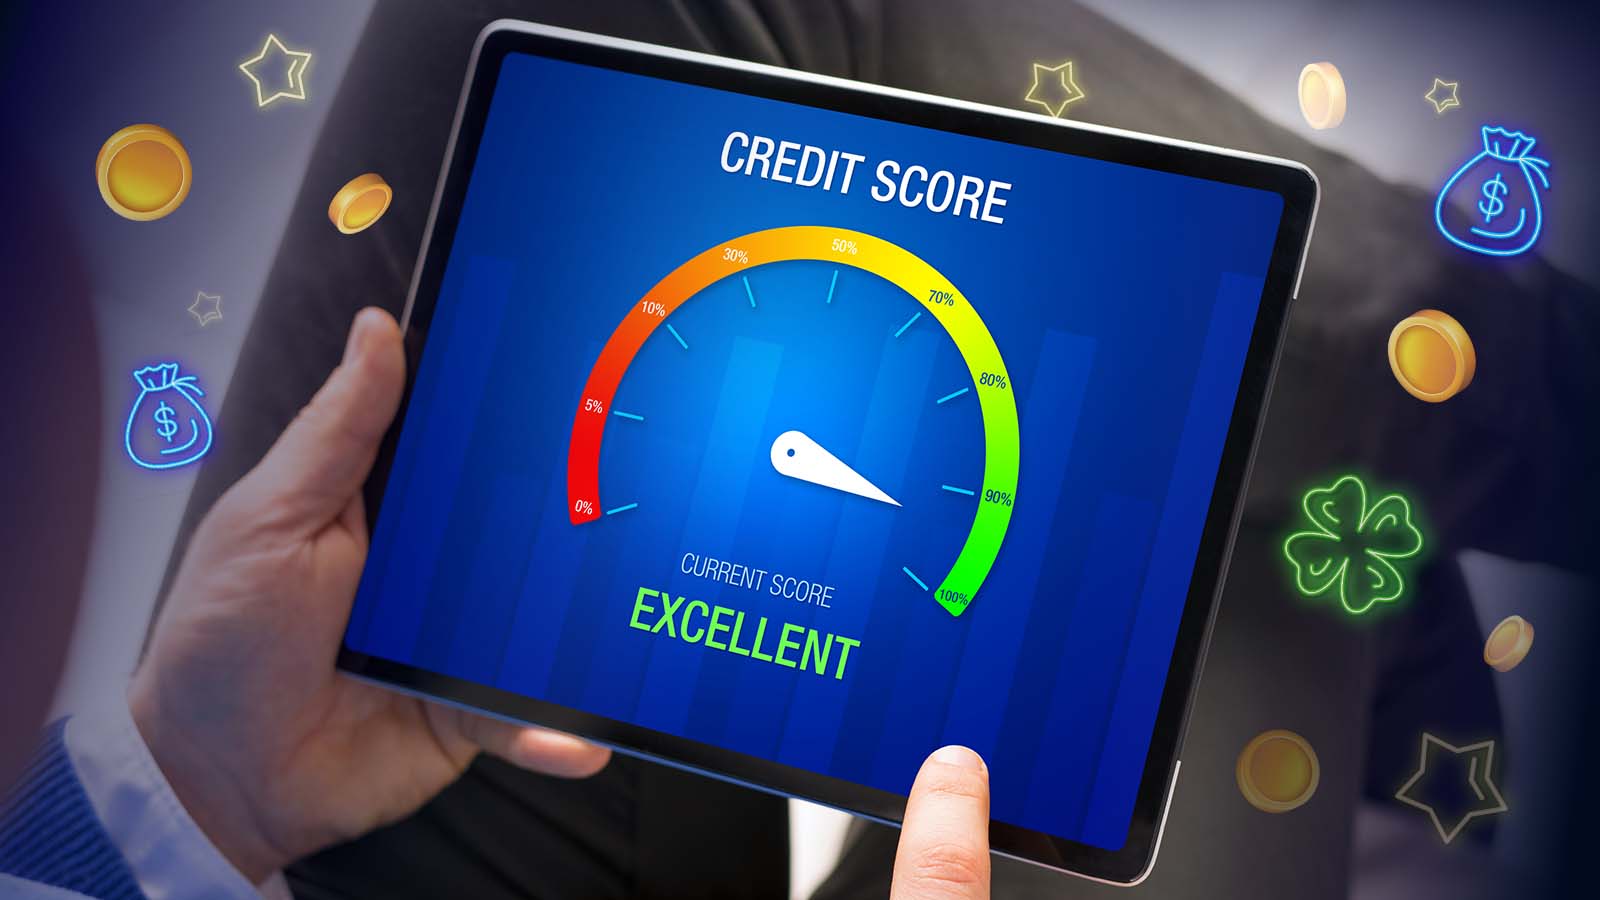 The fine print_How does a casino marker affect your credit score